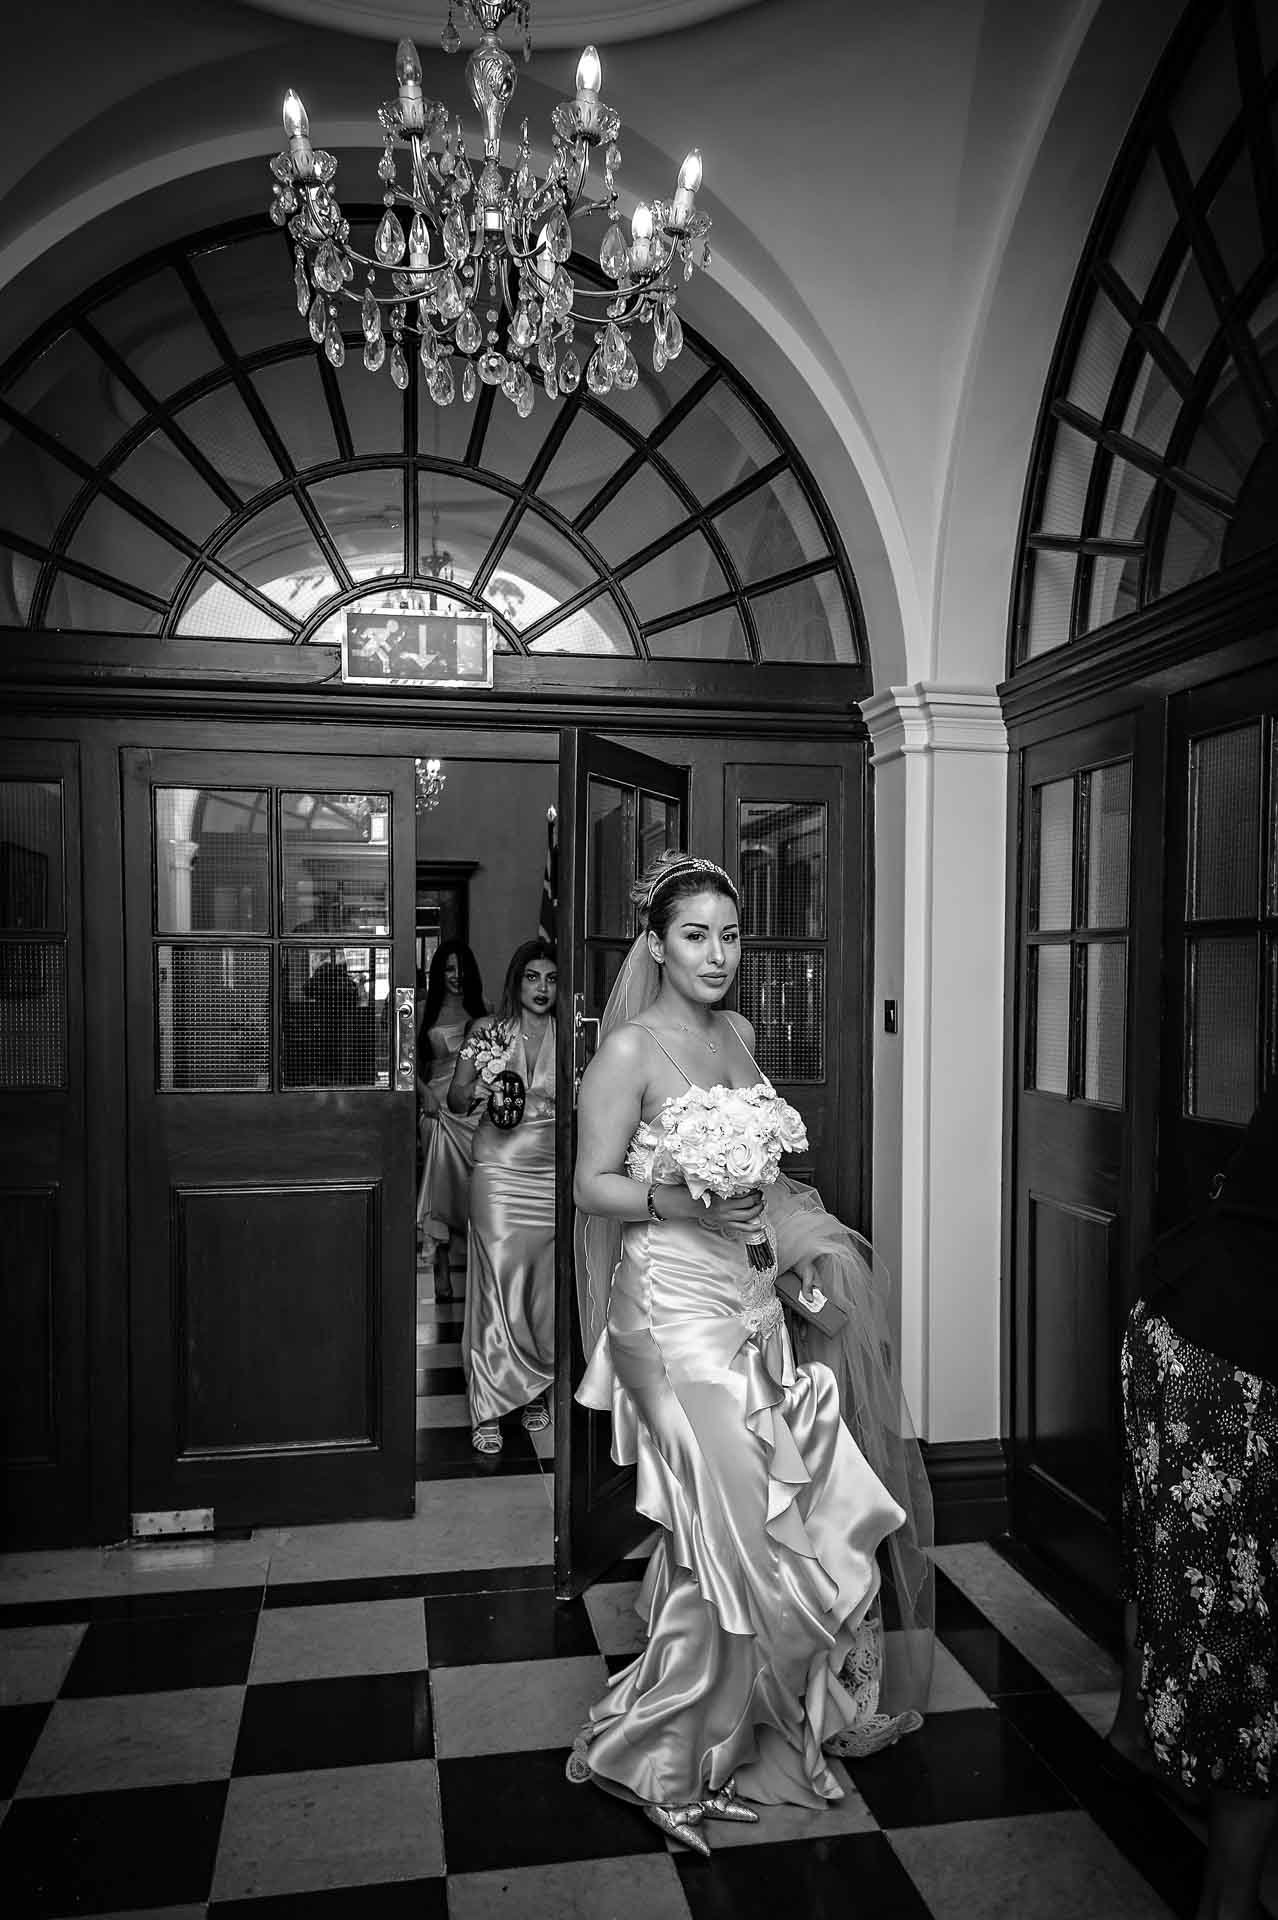 The bridal party arrive in the entrance hall of Chelsea Old Town Hall